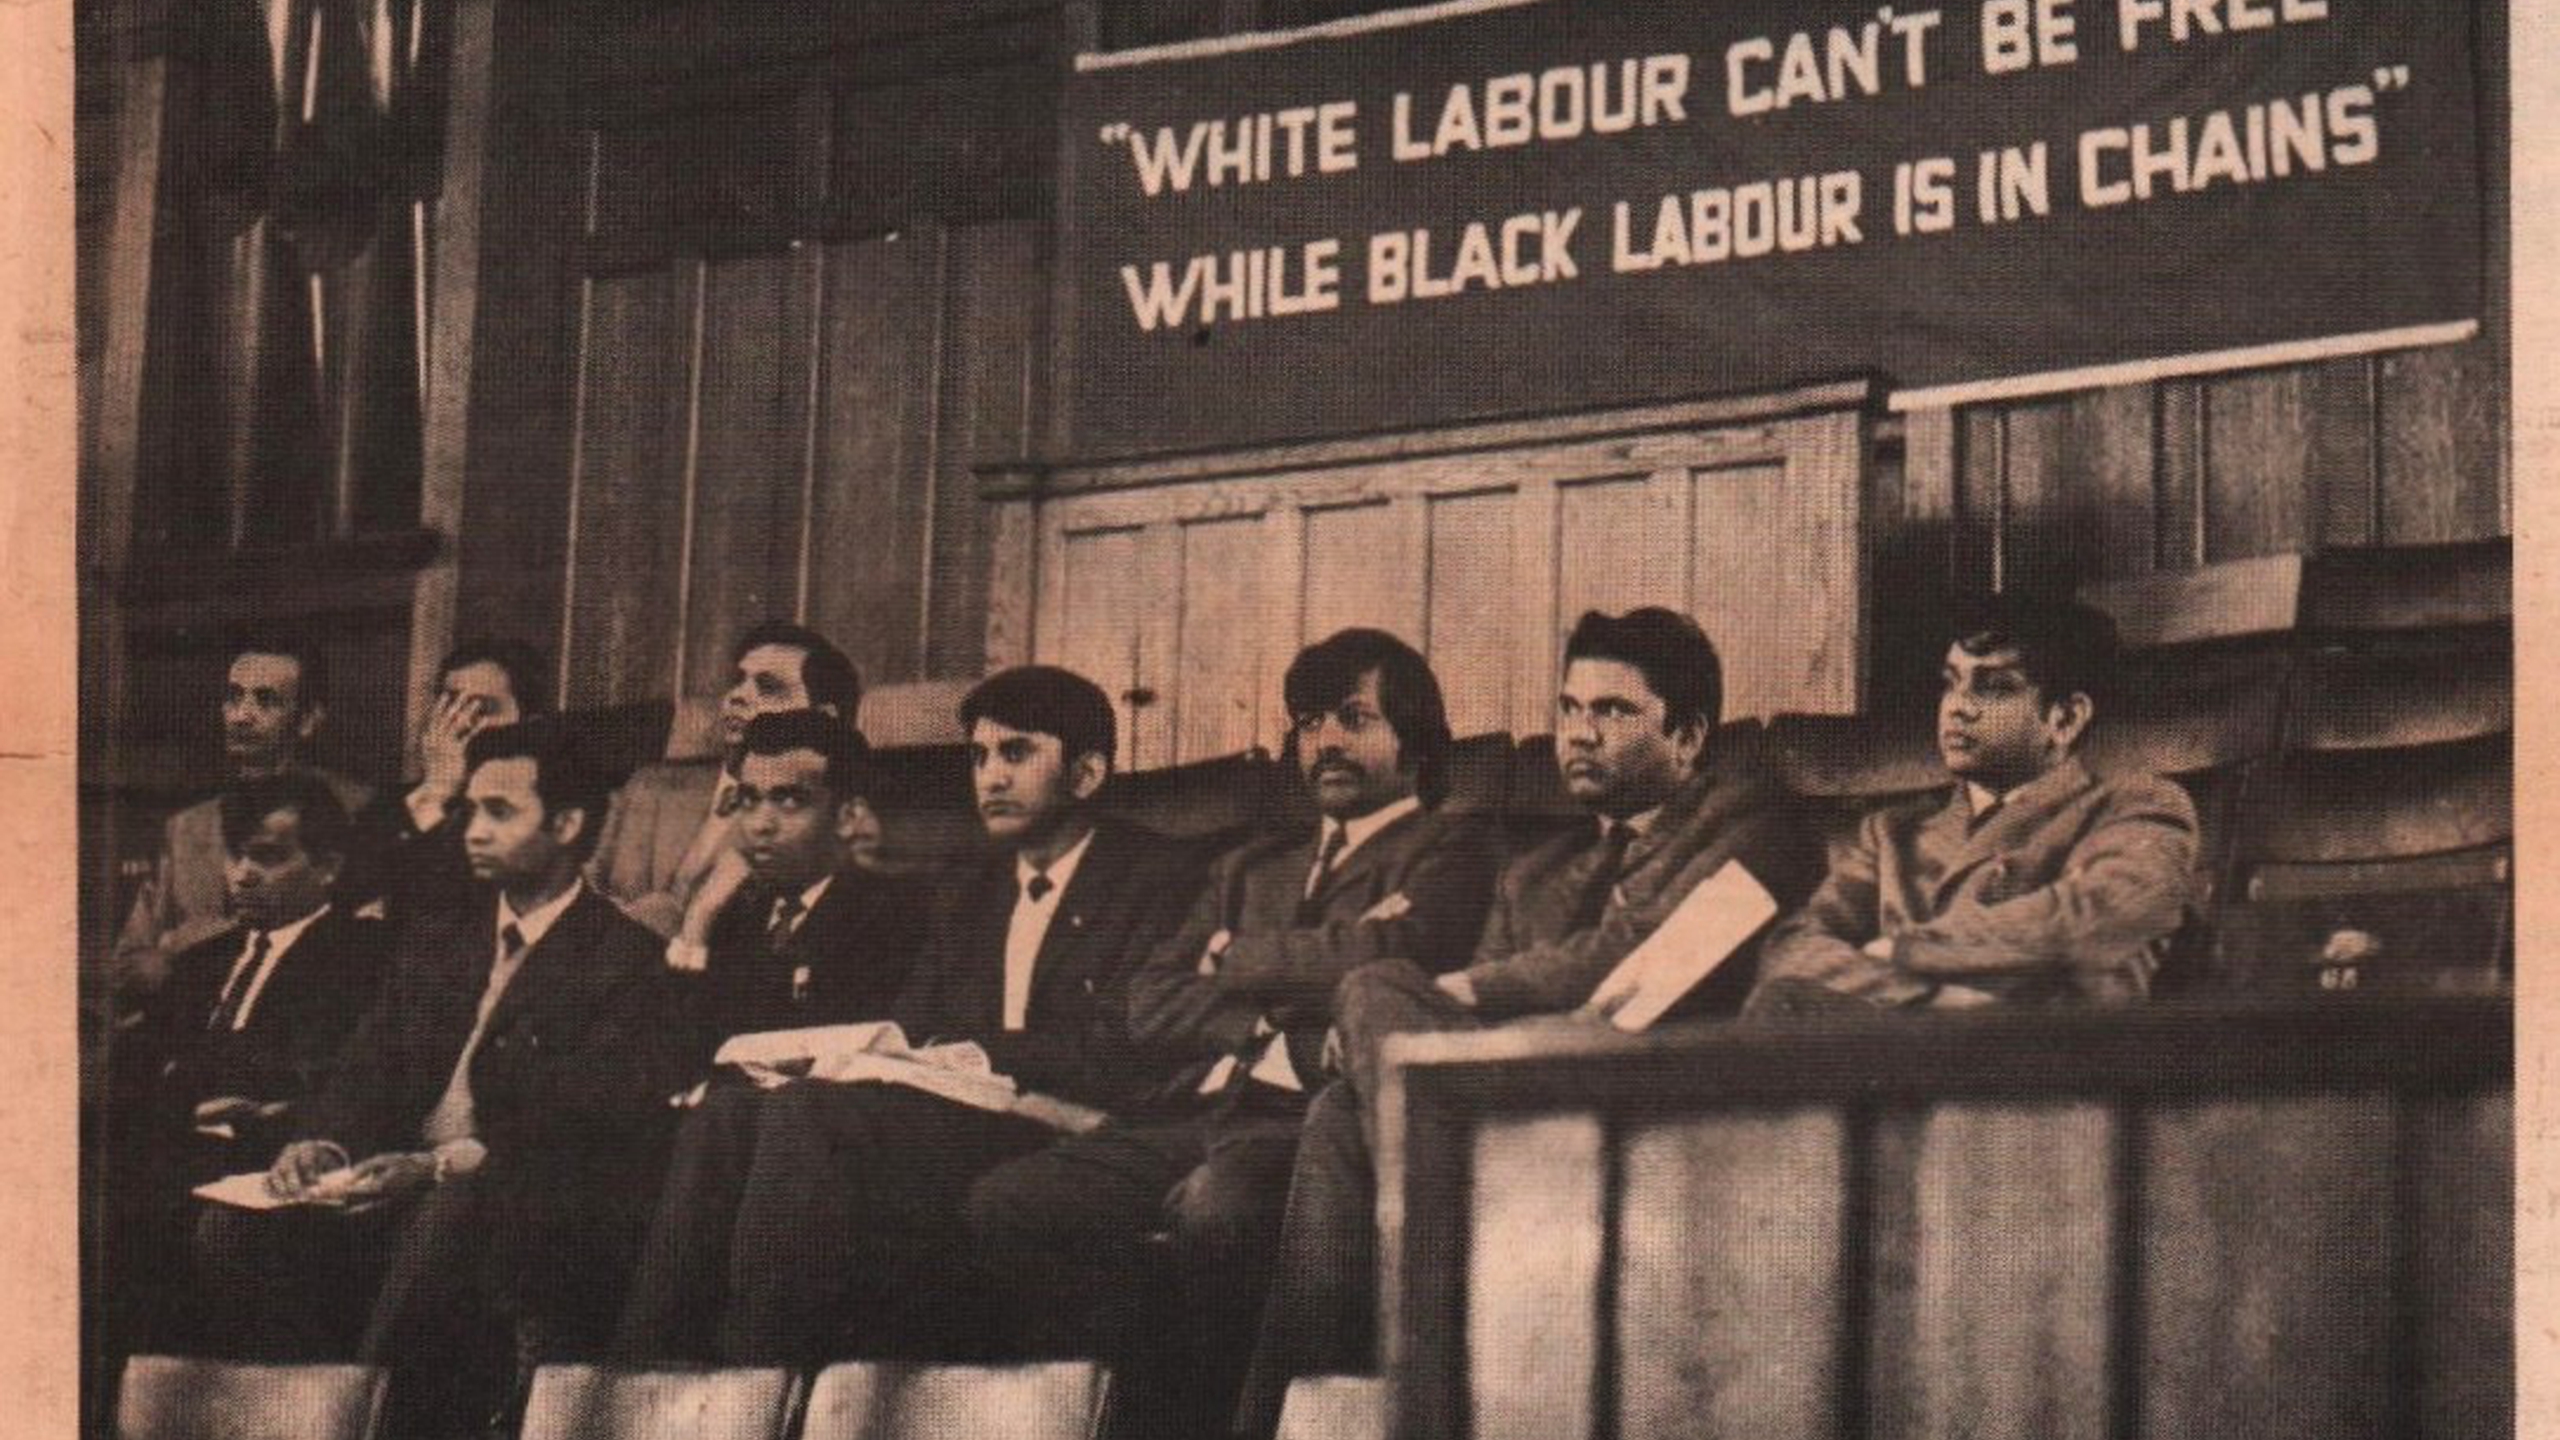 Photograph with banner in the background displaying the words "white labour can't be free while black labour is in chains". In the foreground, a group of racialised men wearing suits.